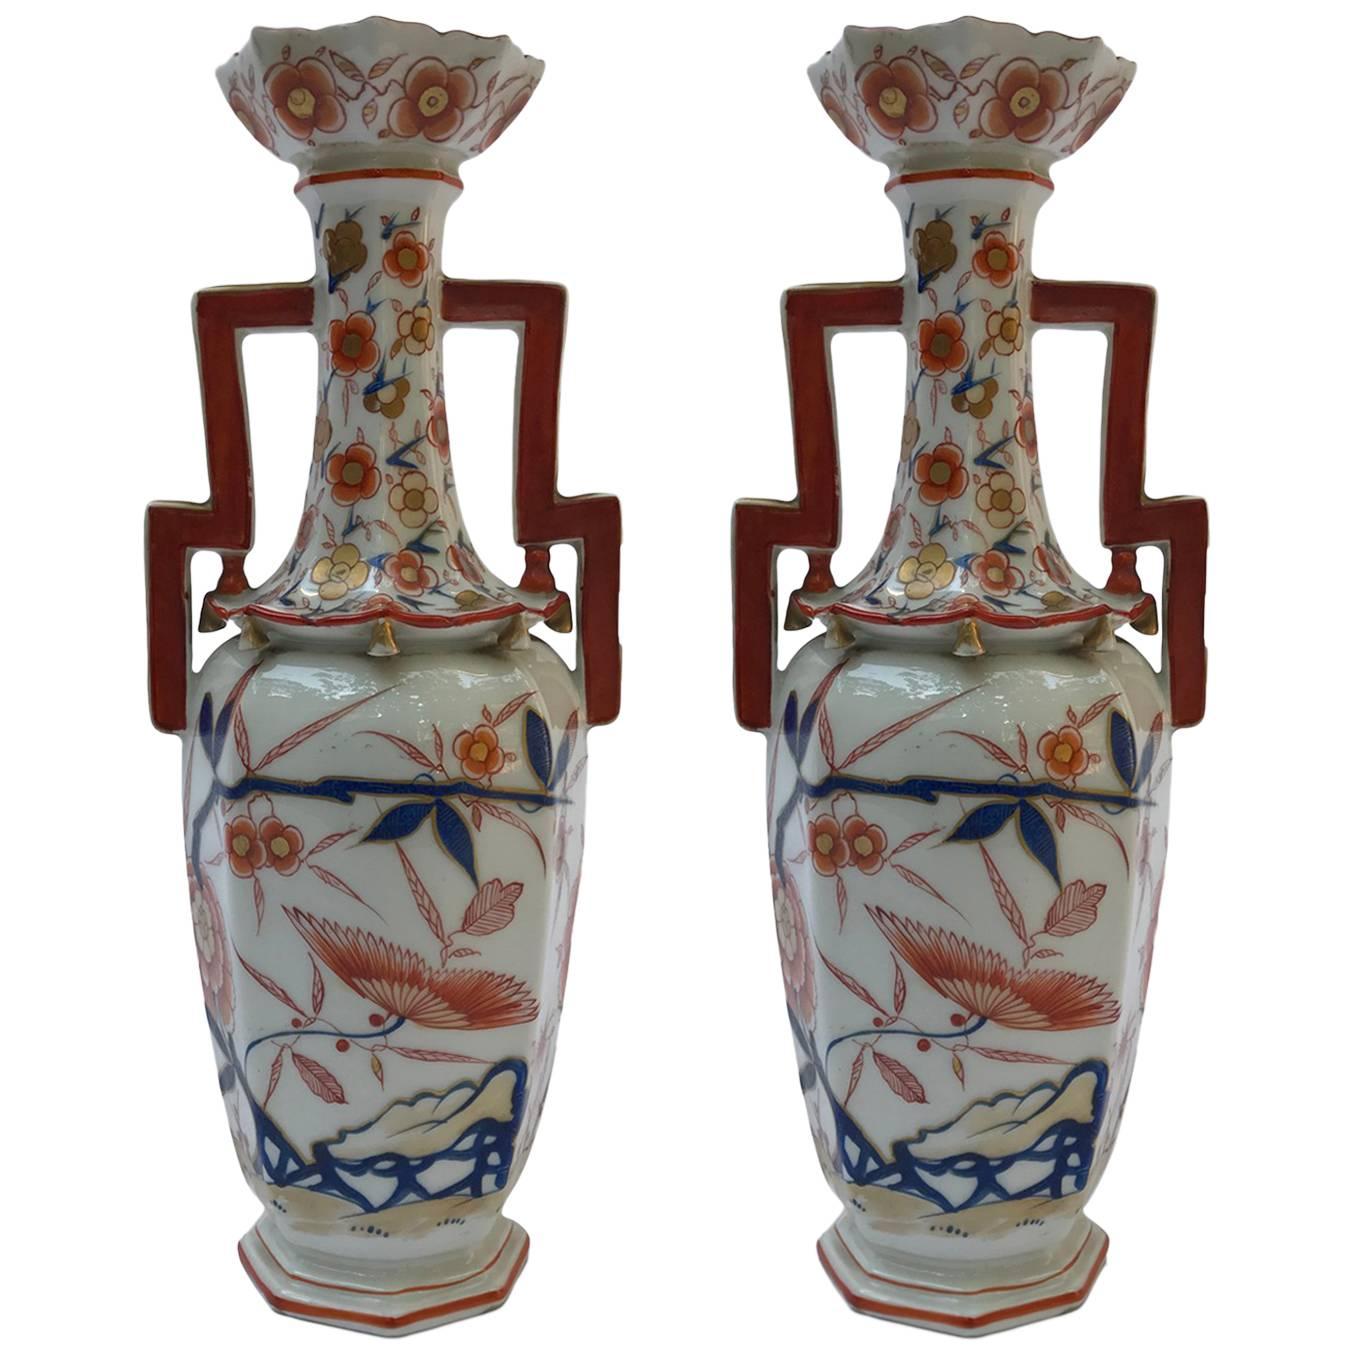 Pair of French Samson Porcelain Double Handled Red and Blue Vases 1870 circa